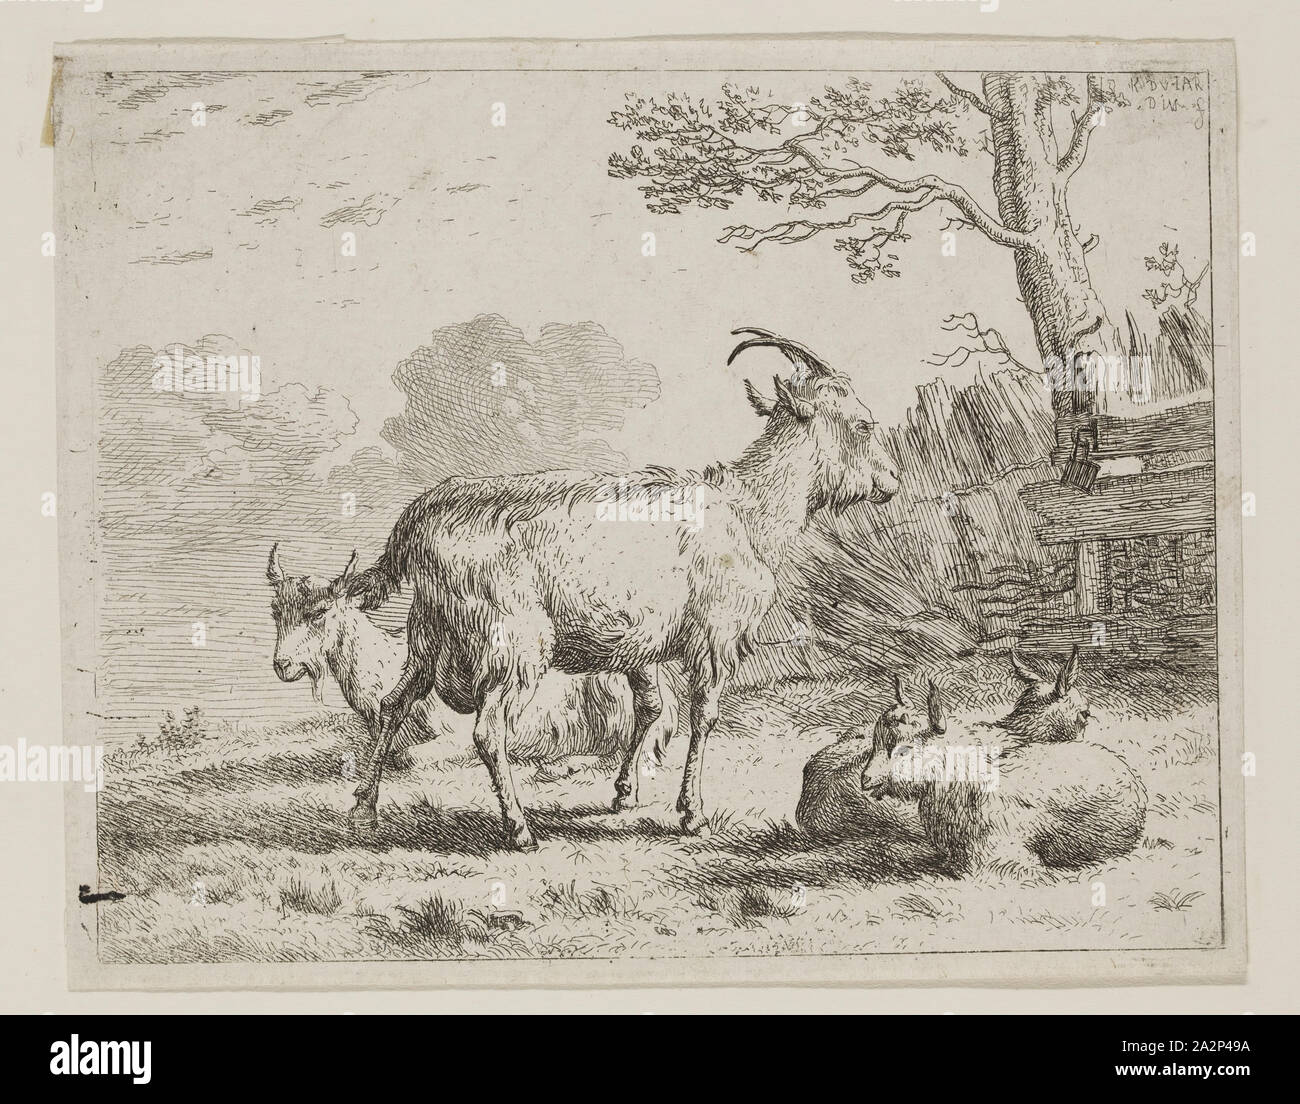 Karel Dujardin, Dutch, 1622-1678, Four Goats, ca. 1658, etching printed in black ink on laid paper, Plate: 4 7/8 × 6 1/8 inches (12.4 × 15.6 cm Stock Photo